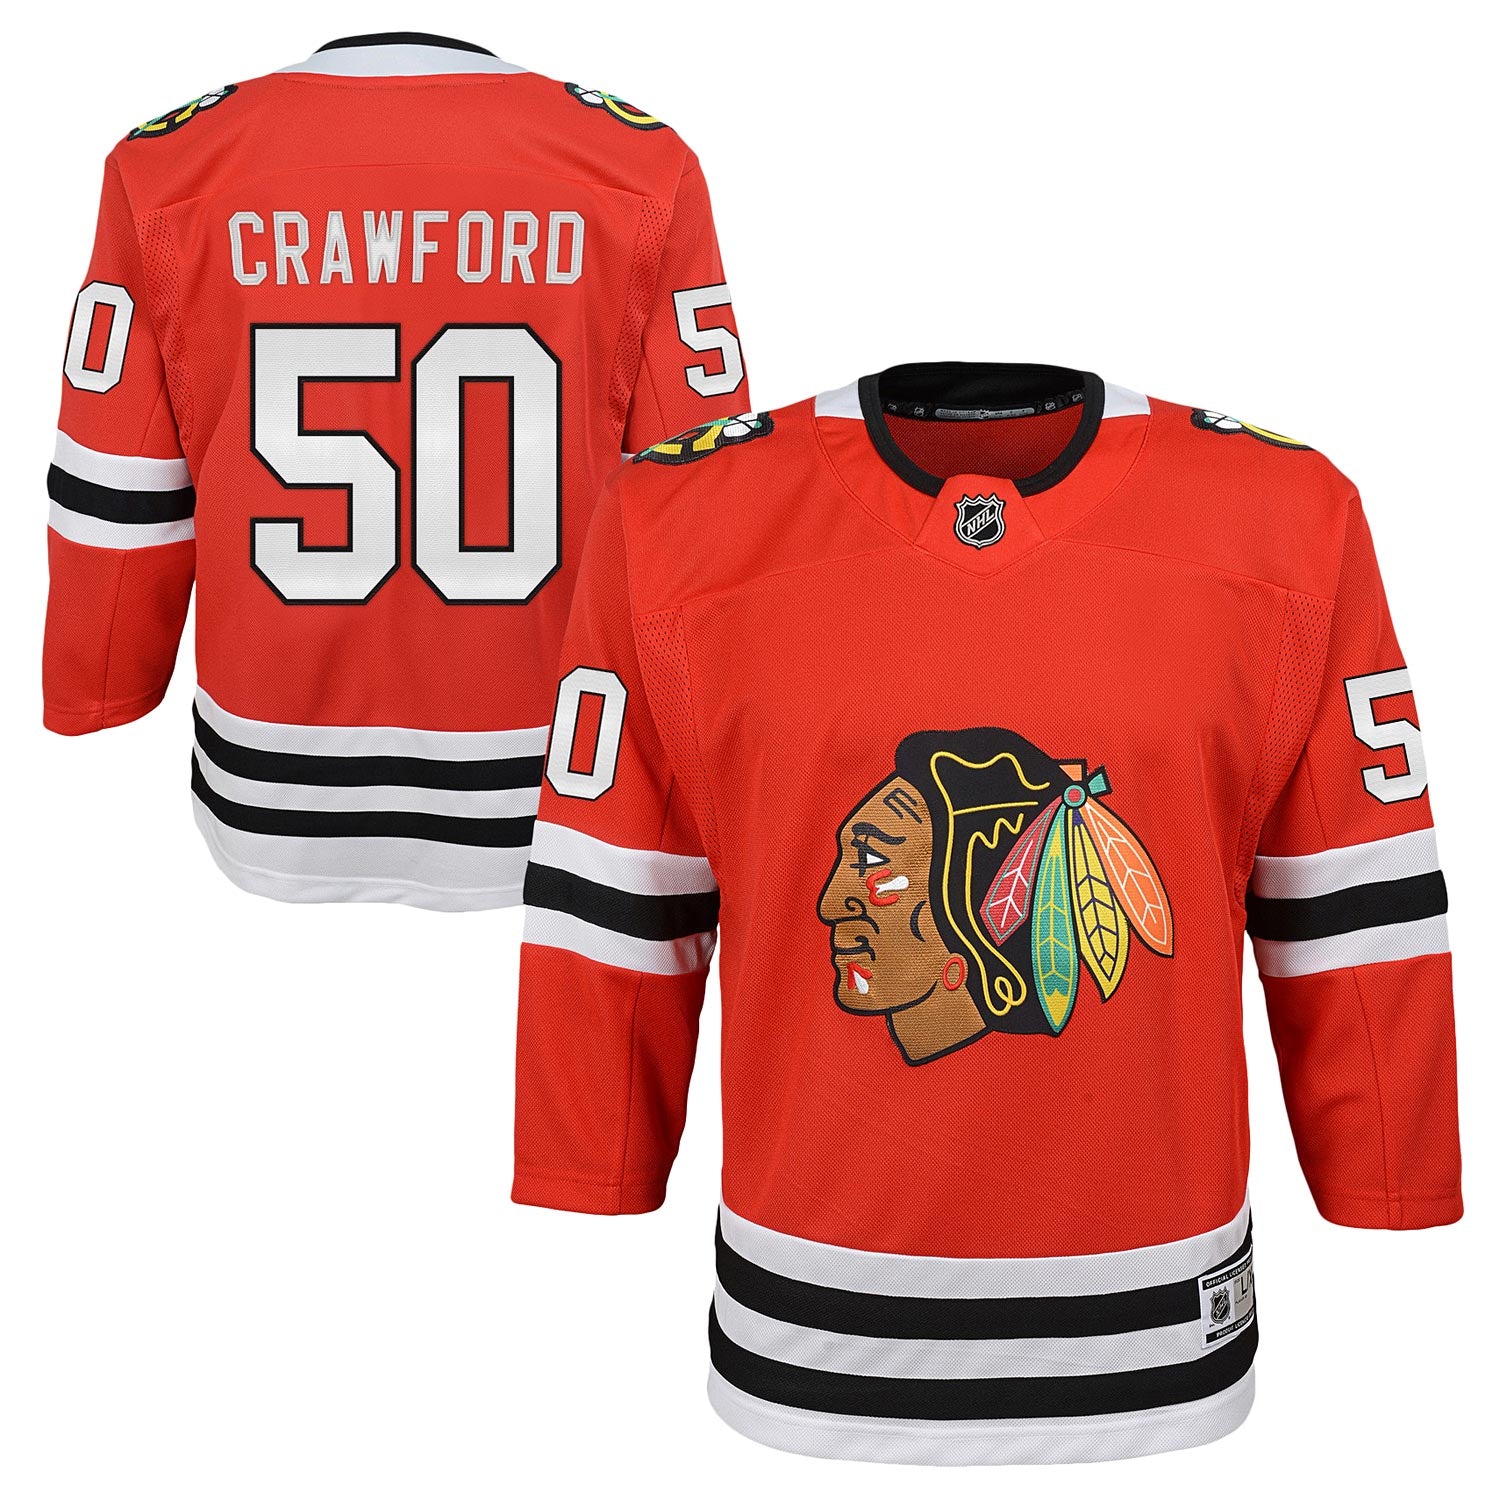 Reebok Chicago Blackhawks Corey Crawford Youth Red Premier Jersey w/ Authentic Lettering L/XL = 12-18